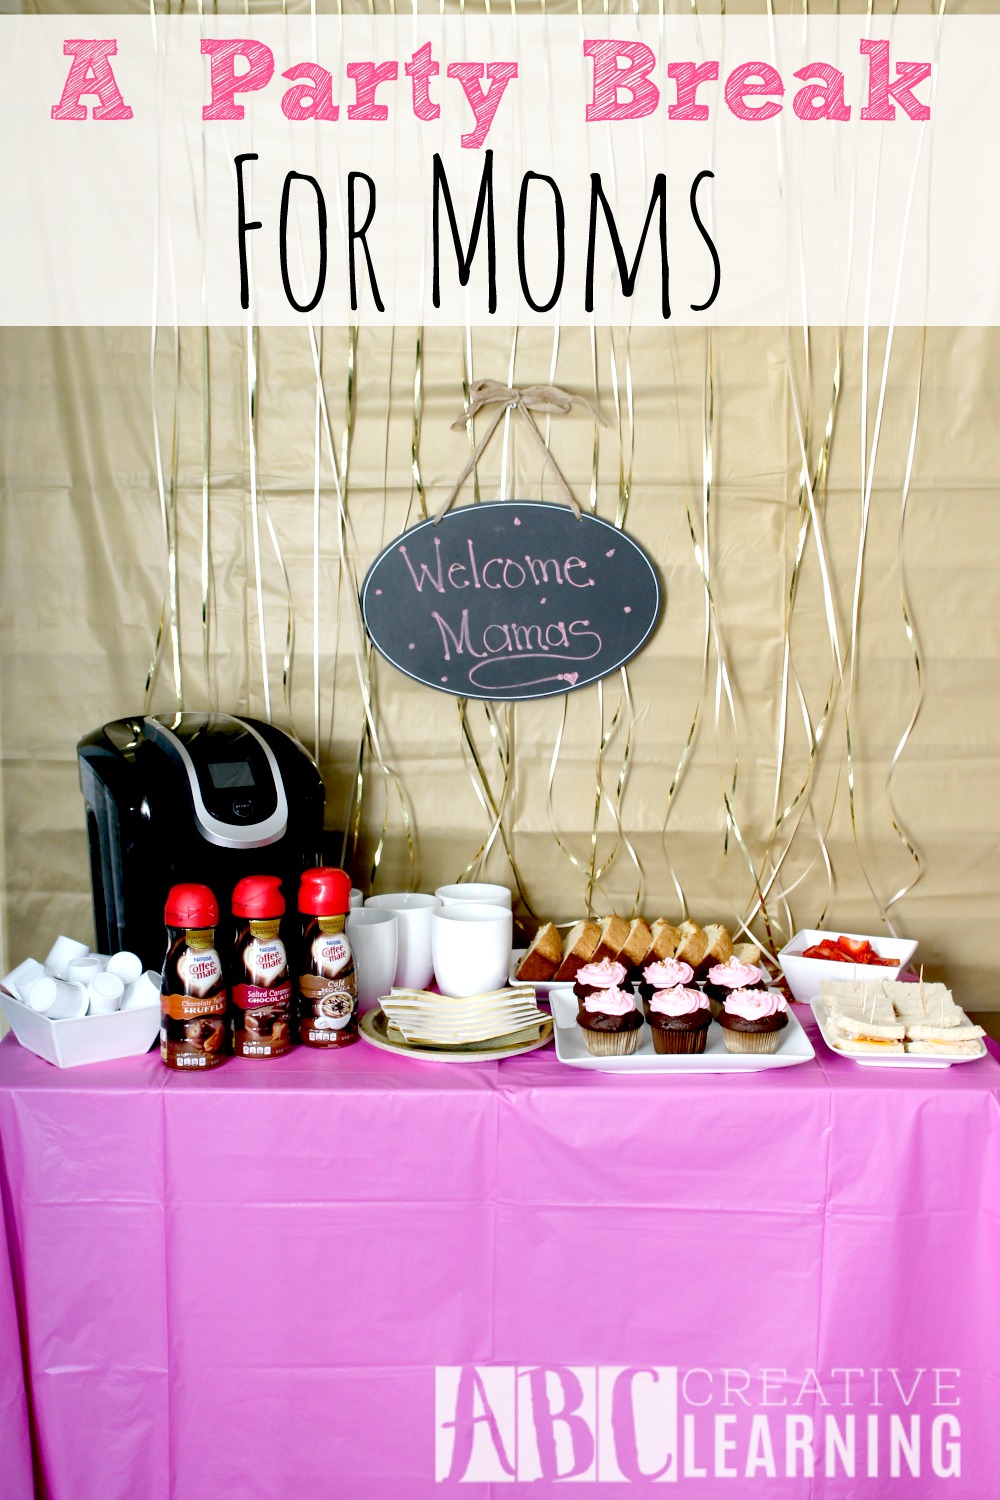 A party Break For Moms